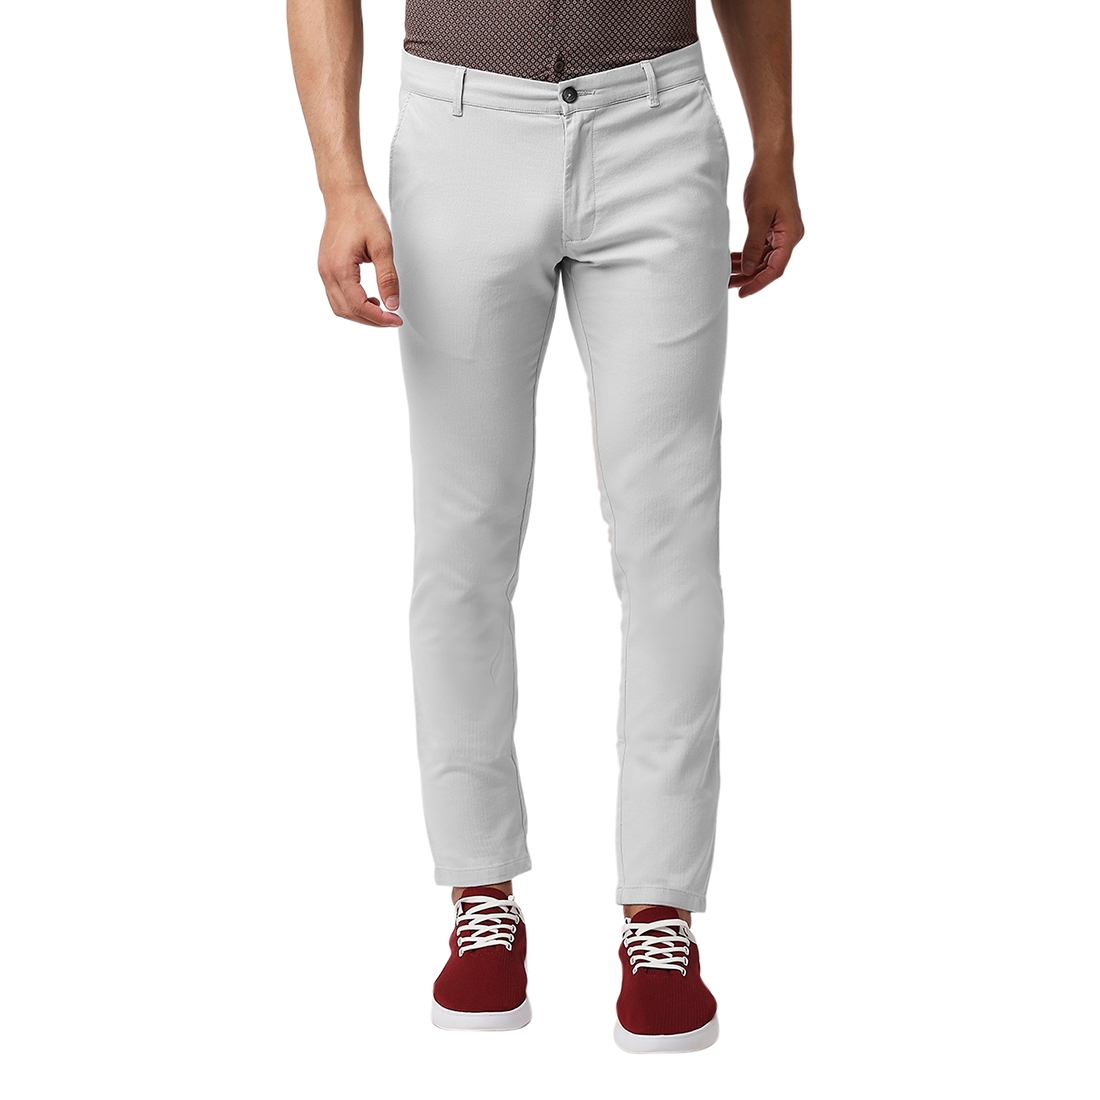 BASICS CASUAL SELF LIGHT GREY COTTON STRETCH TAPERED TROUSERS 